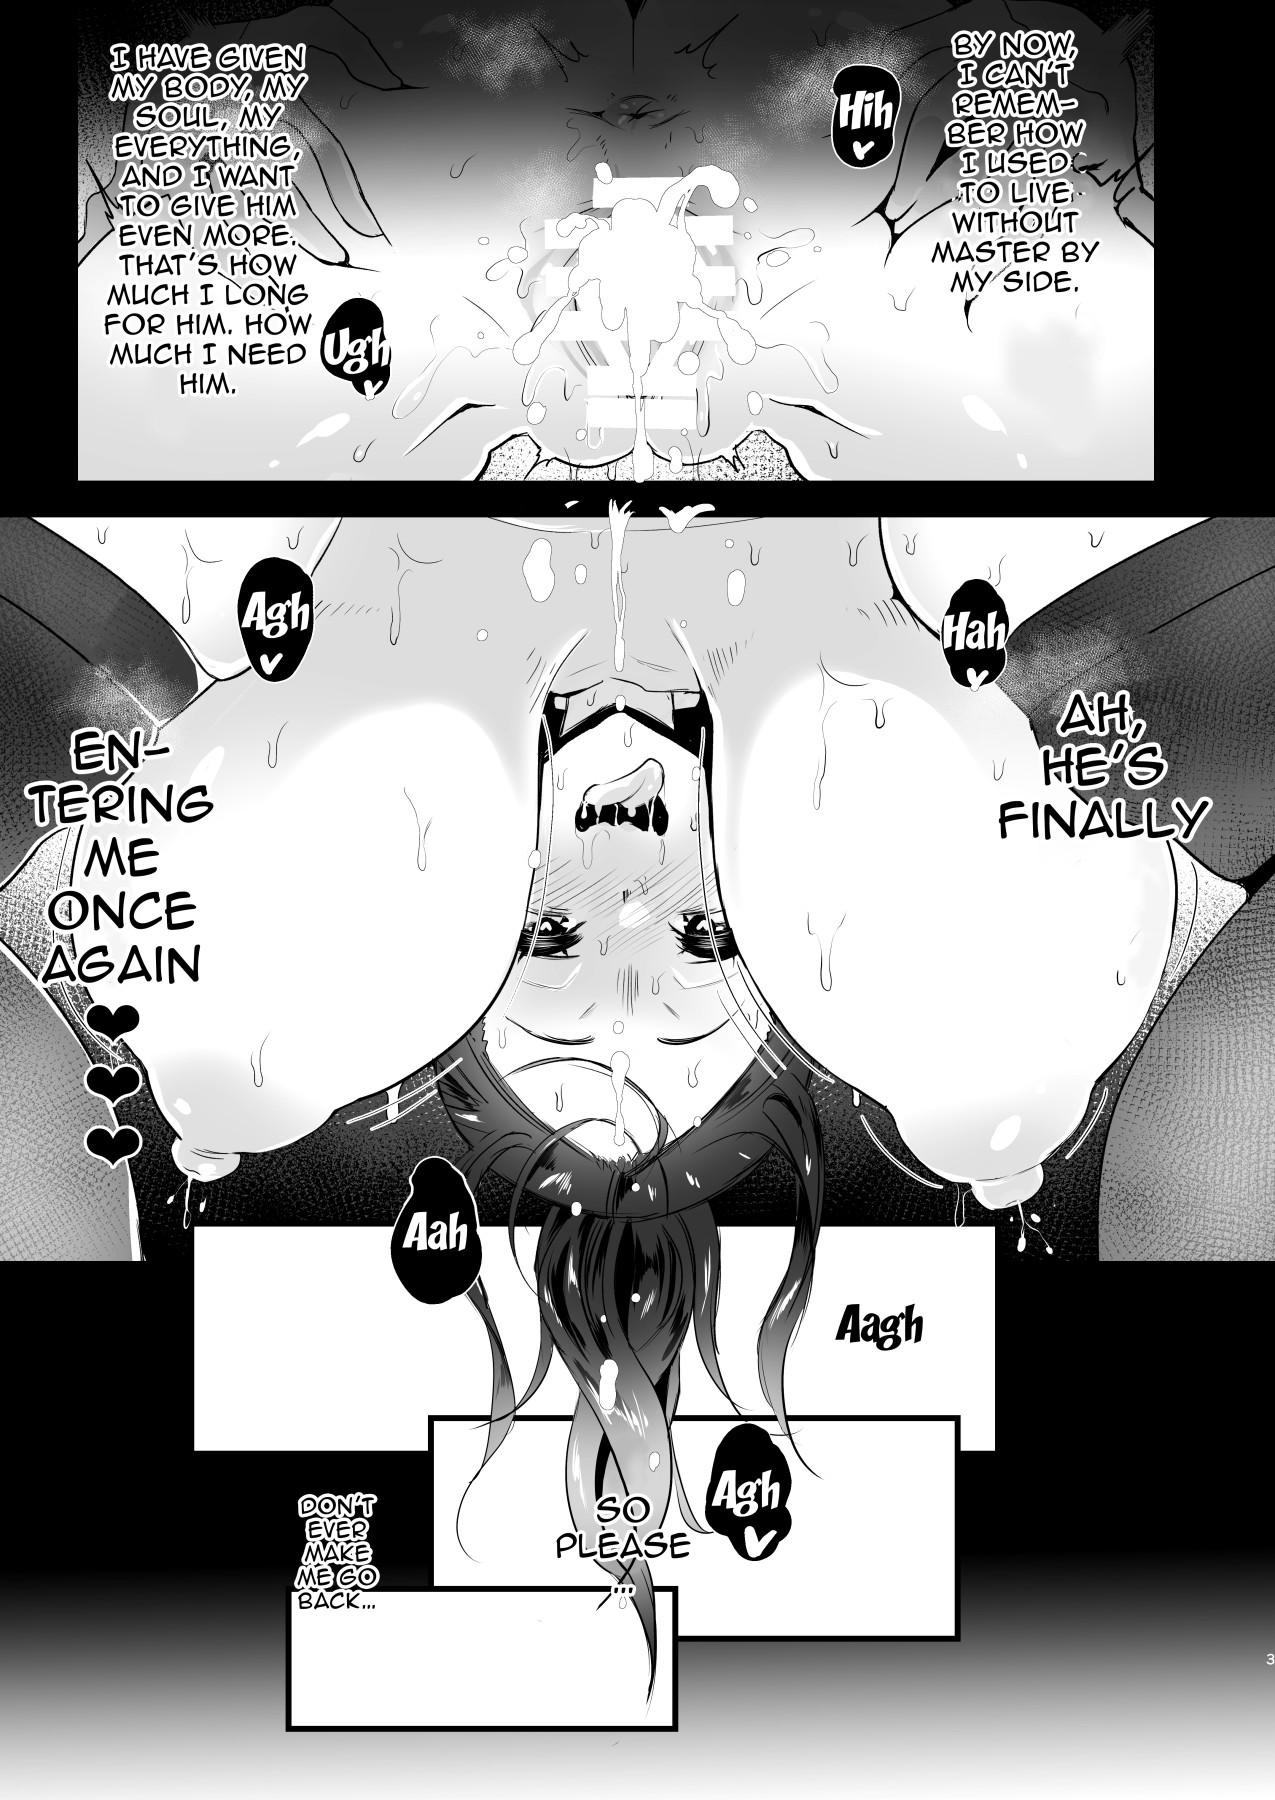 Hot Girls Getting Fucked Himawari no Kage | The Other Side of the Sunflower - Original Full - Page 2